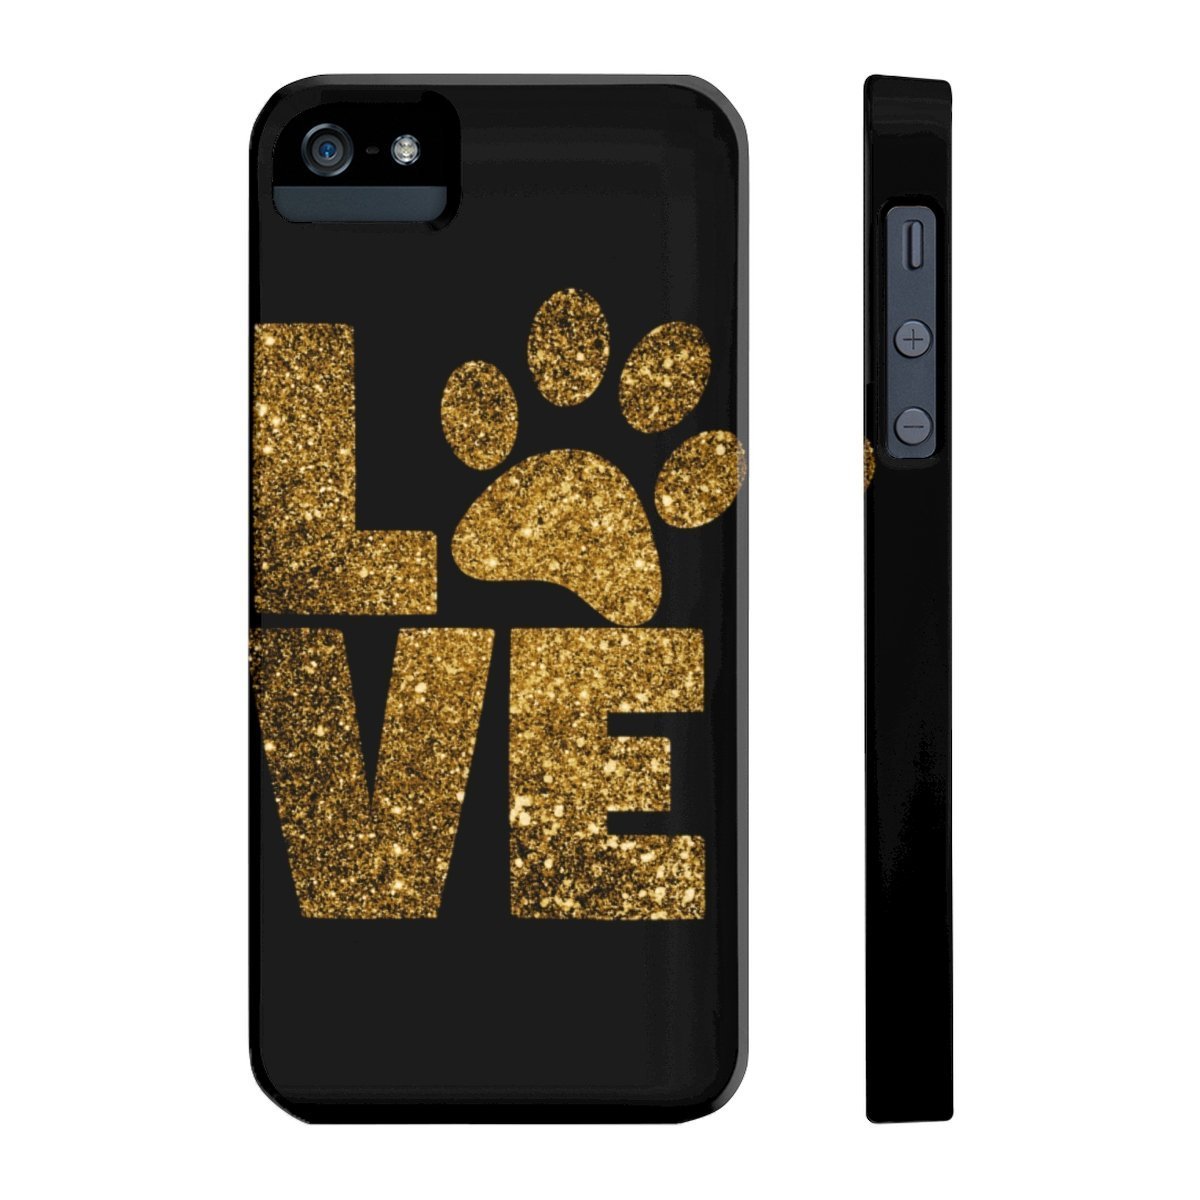 Cute phone case for pet owners, Love Paw Prints Phone Case